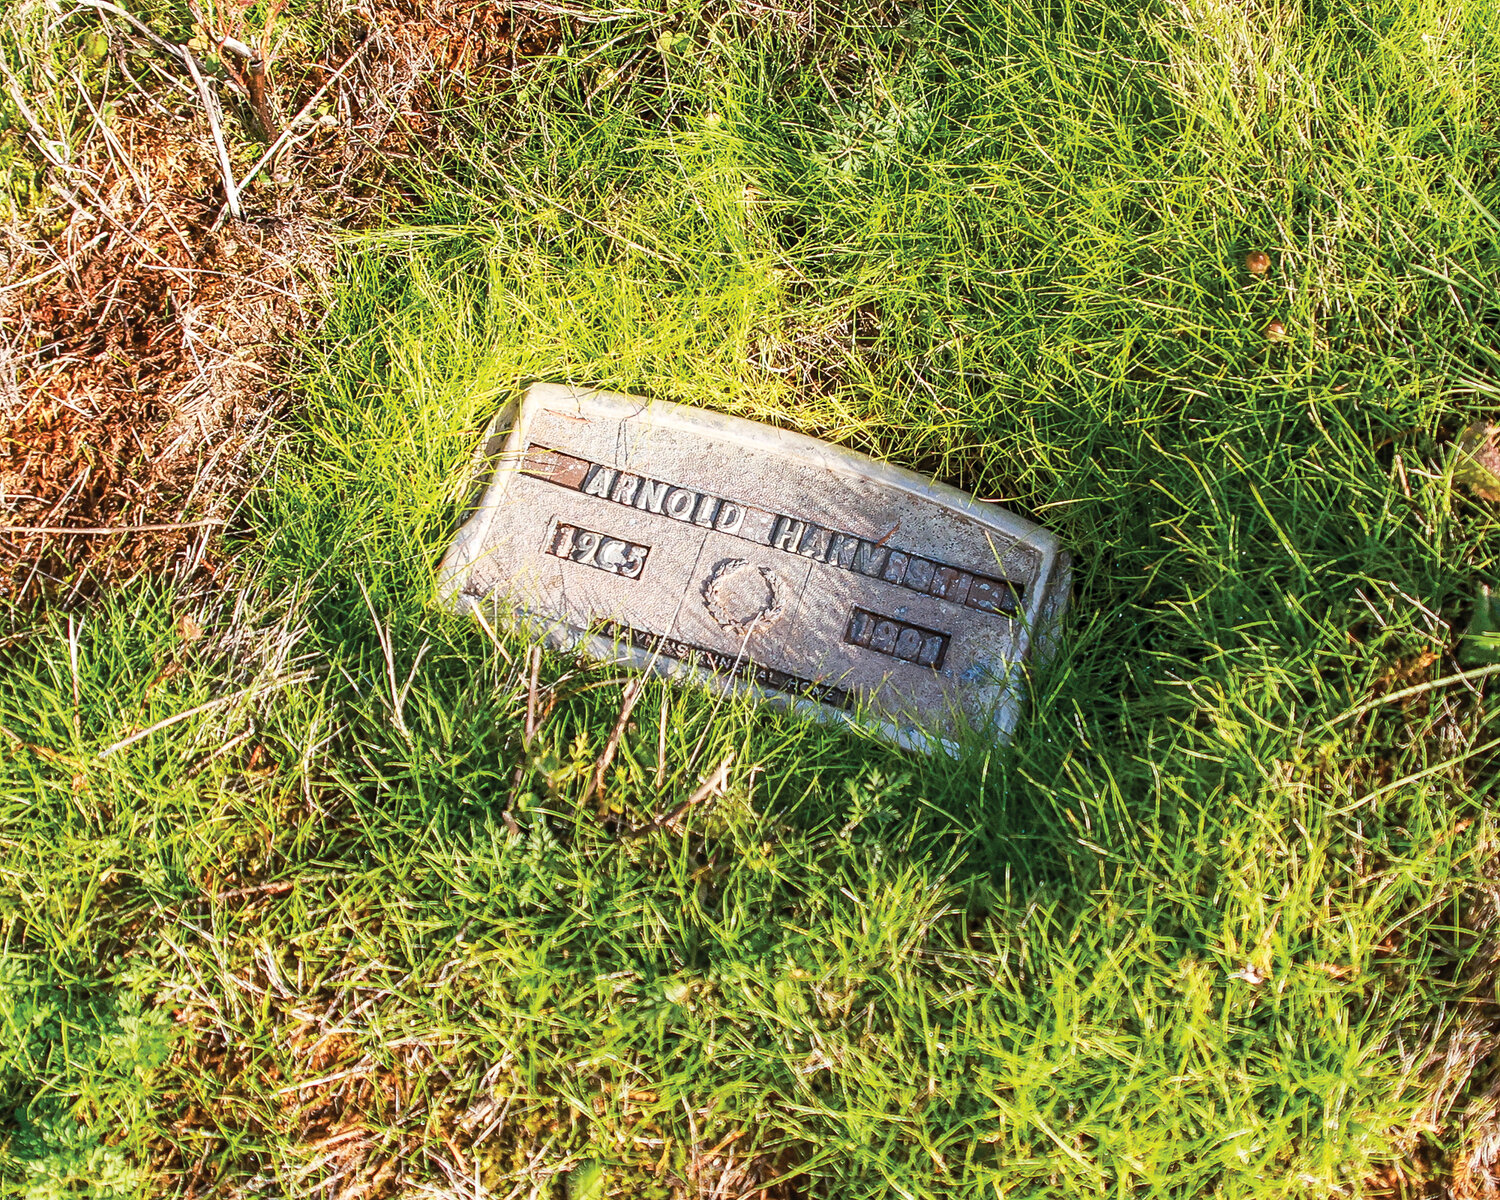 An example of an older temporary marker at the Brush Prairie Cemetery.